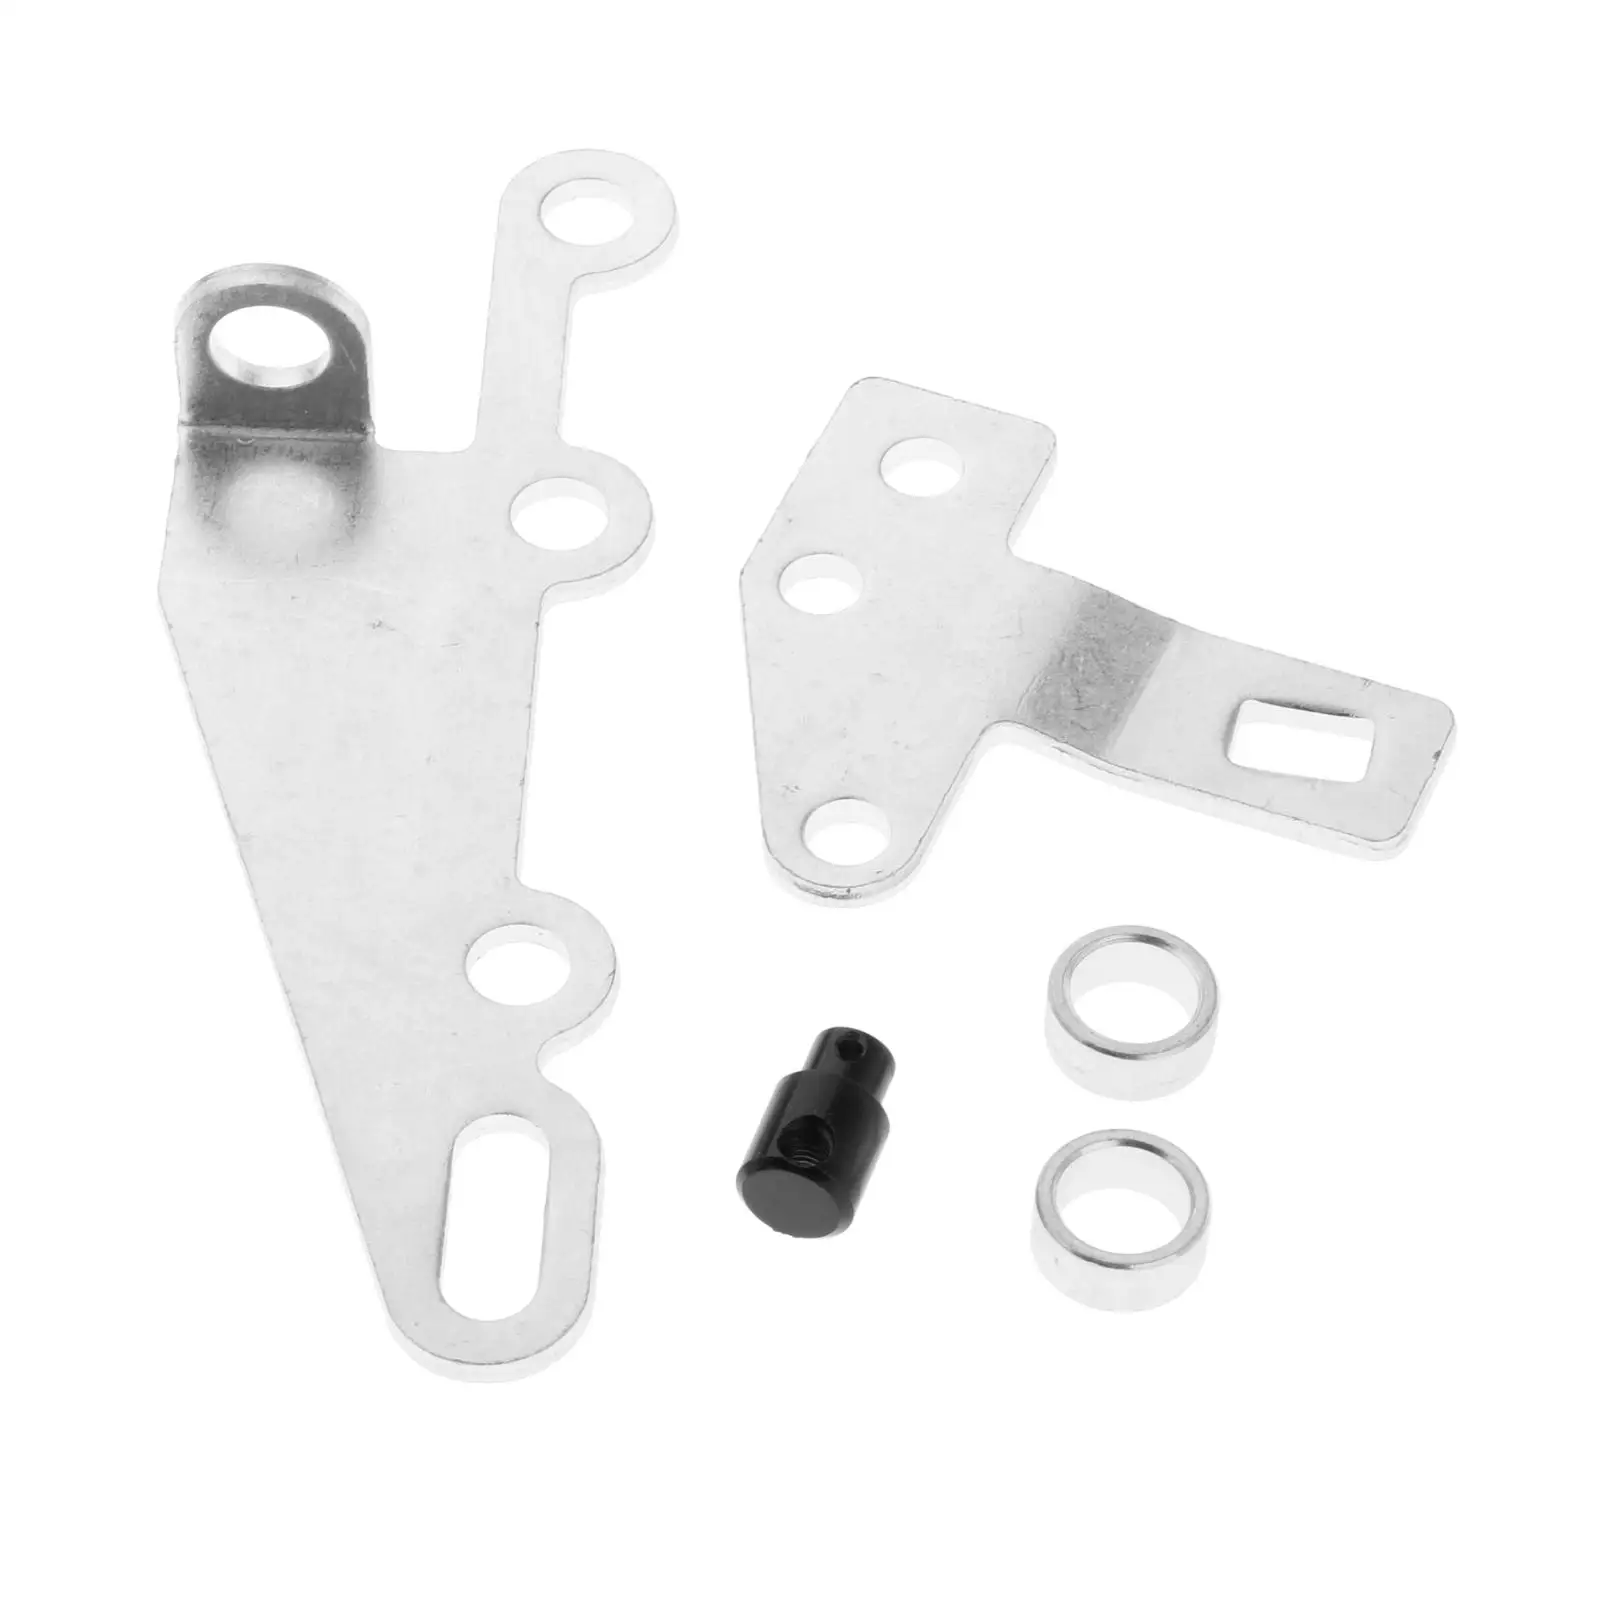 Bracket & Lever Kit Replacements Fits for Turbo TH400 TH350 TH250 4L60